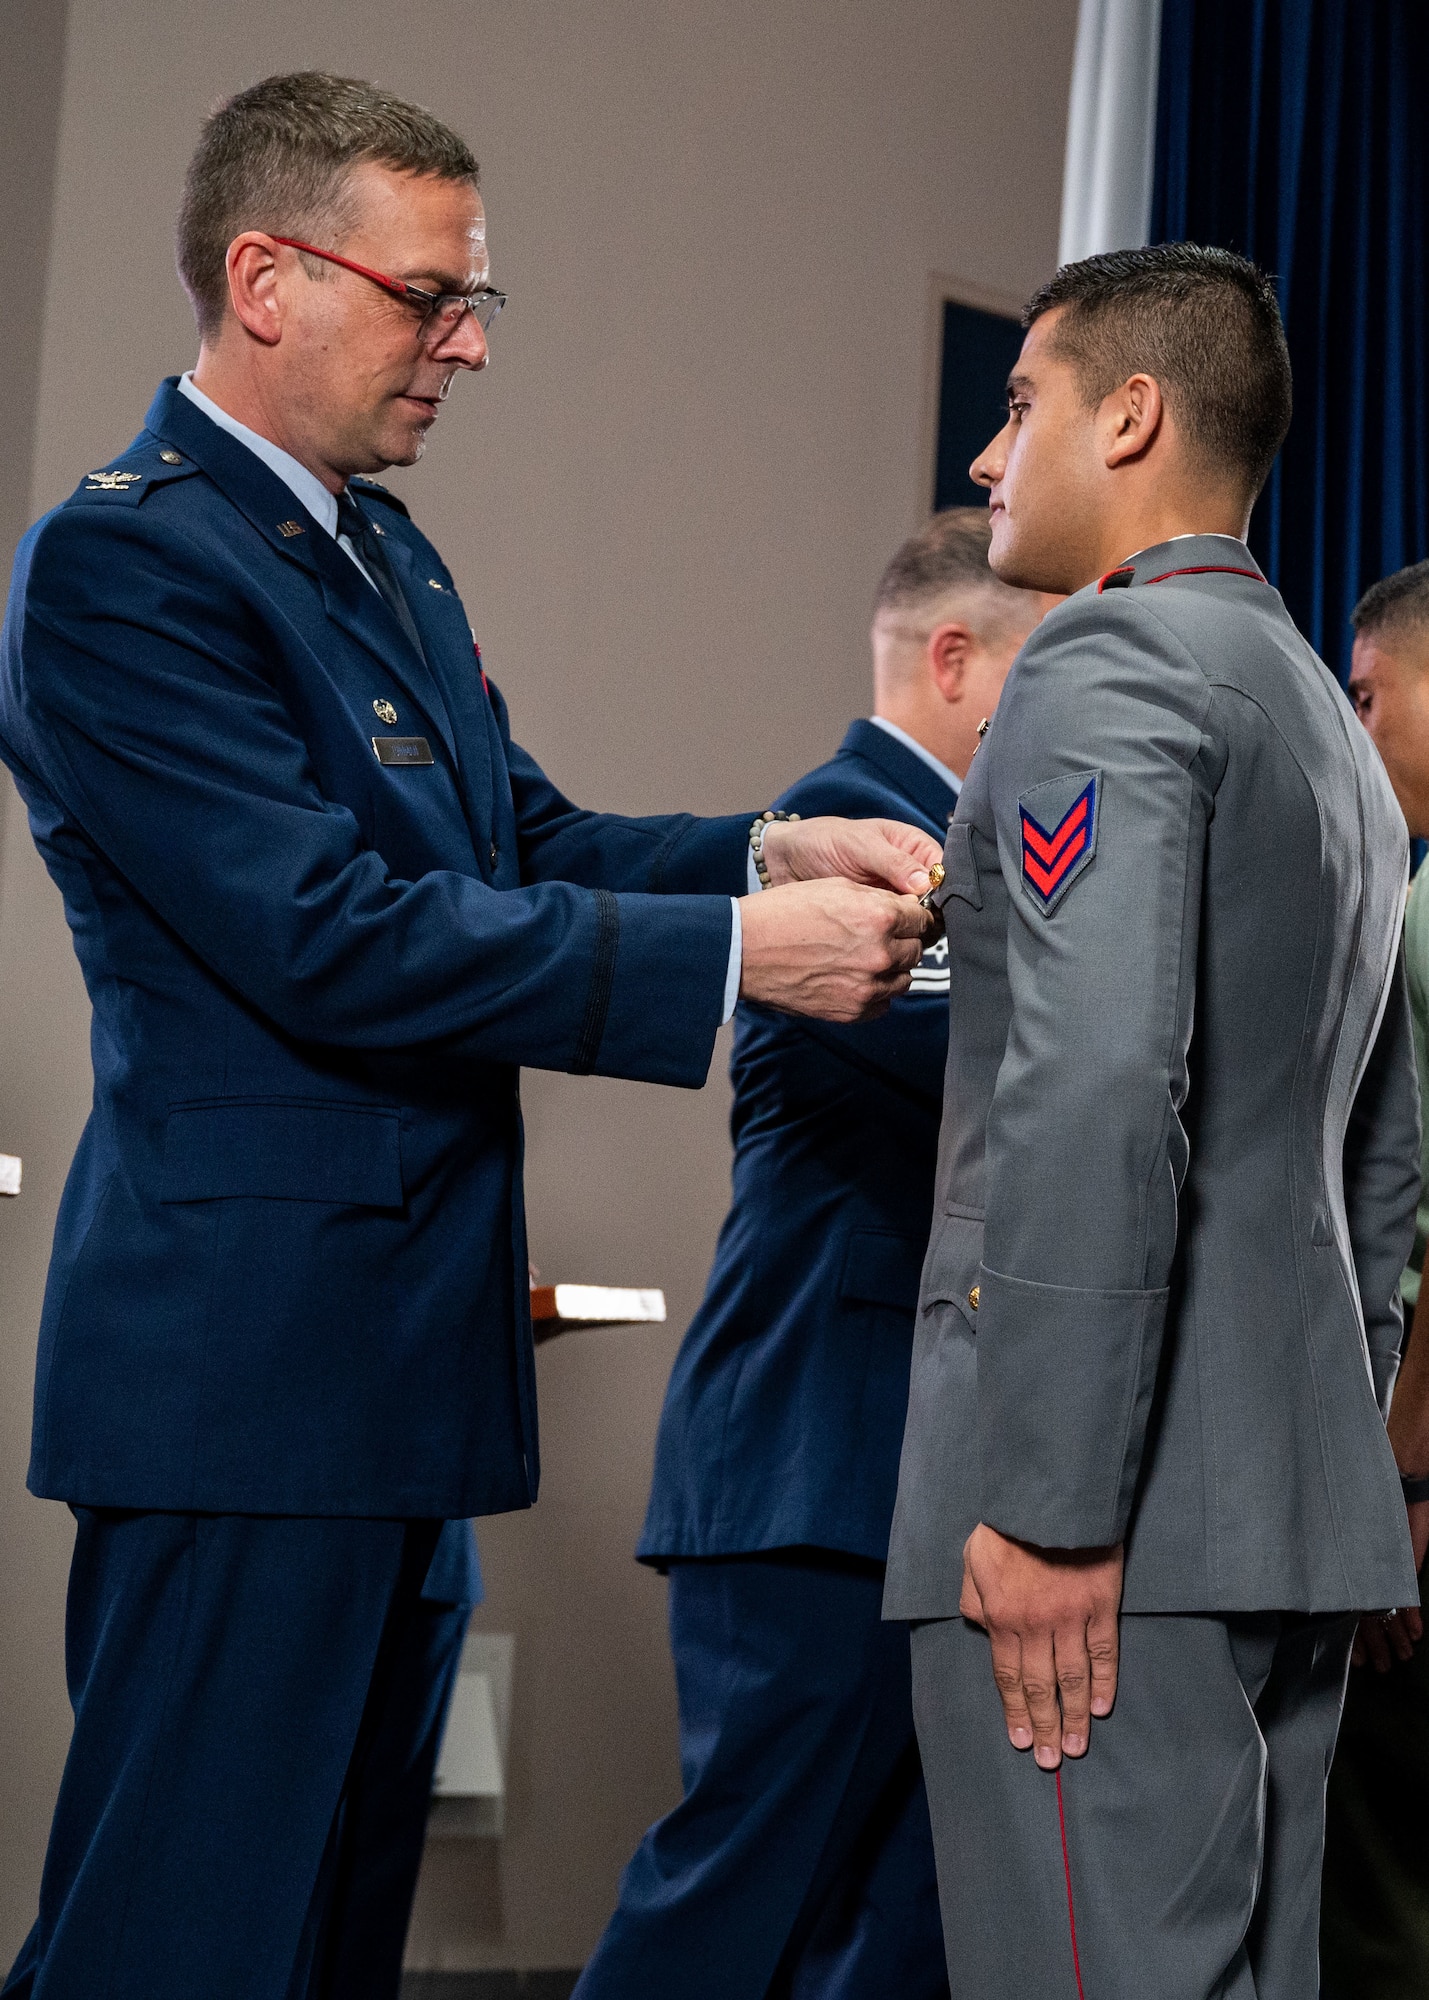 Col. Bryan Tuinman, commandant of the Inter-American Air Forces Academy, pins wings on an international military student during IAAFA’s graduation at Joint Base San Antonio-Lackland Texas, April 24, 2024. Approximately 90 international military students from six partner nations and the U.S. Air Force graduated during the first training cycle of 2024. IAAFA provides instruction in professional military education and leadership, aircrew training and technical courses in Spanish. (U.S. Air Force photo by Vanessa R. Adame)